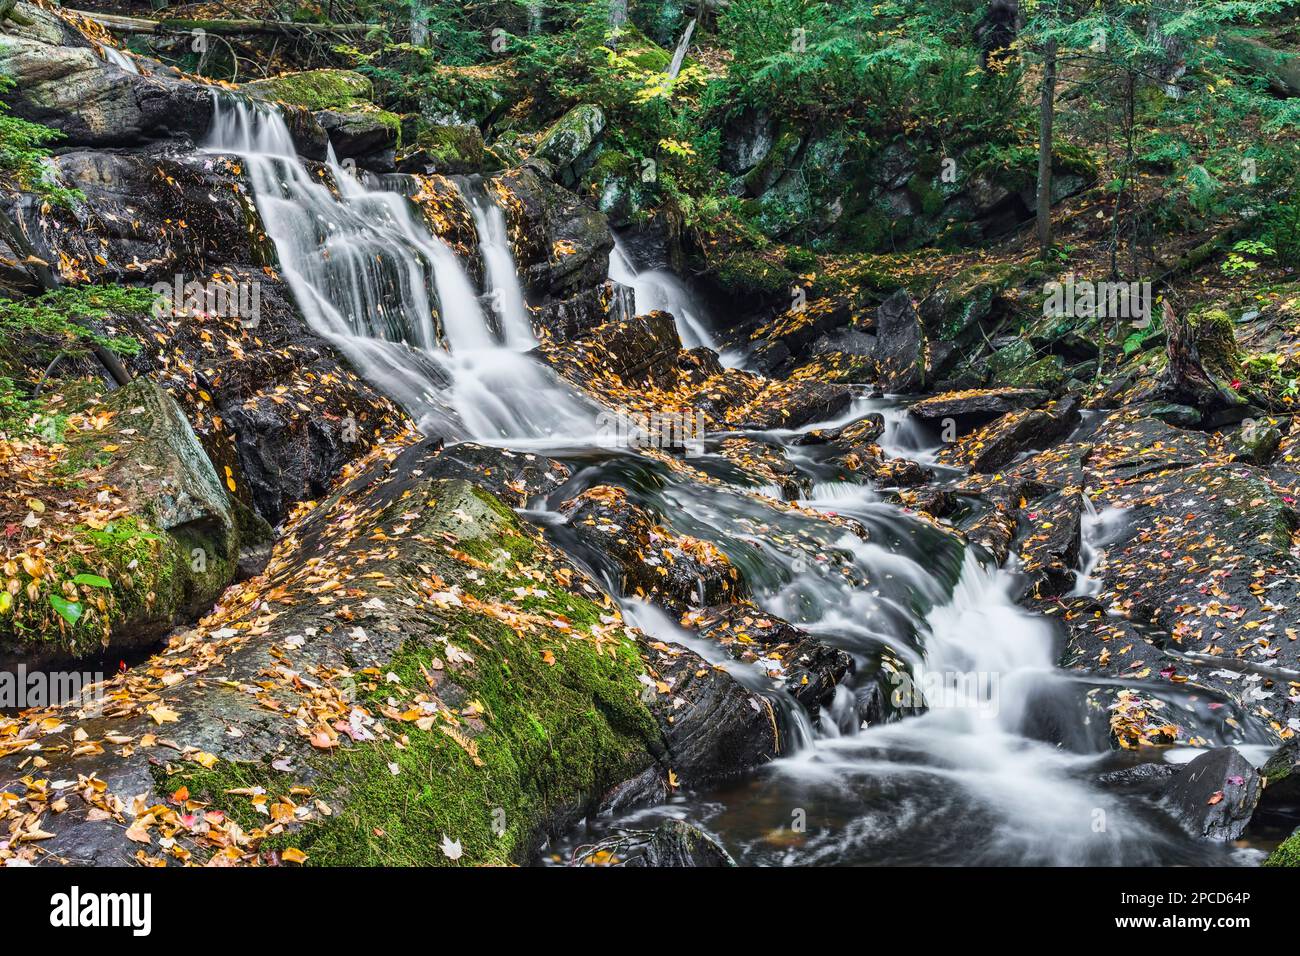 A side view of the gorgeous Potts Falls in cottage country, Ontario, Canada. Stock Photo